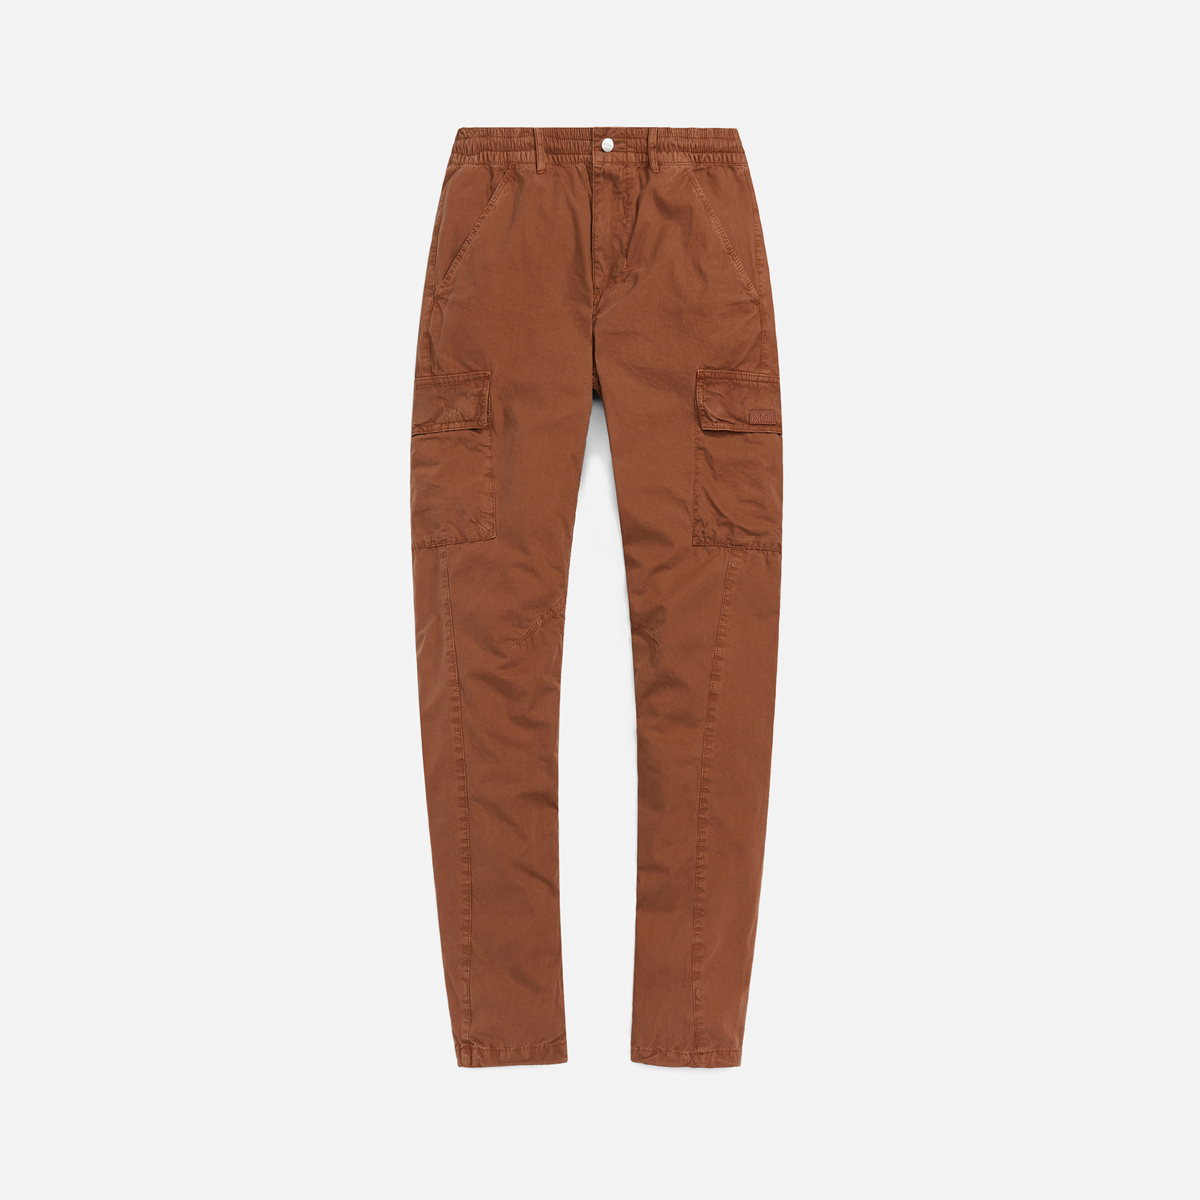 kith-fall-winter-2021-collection-bottoms-26